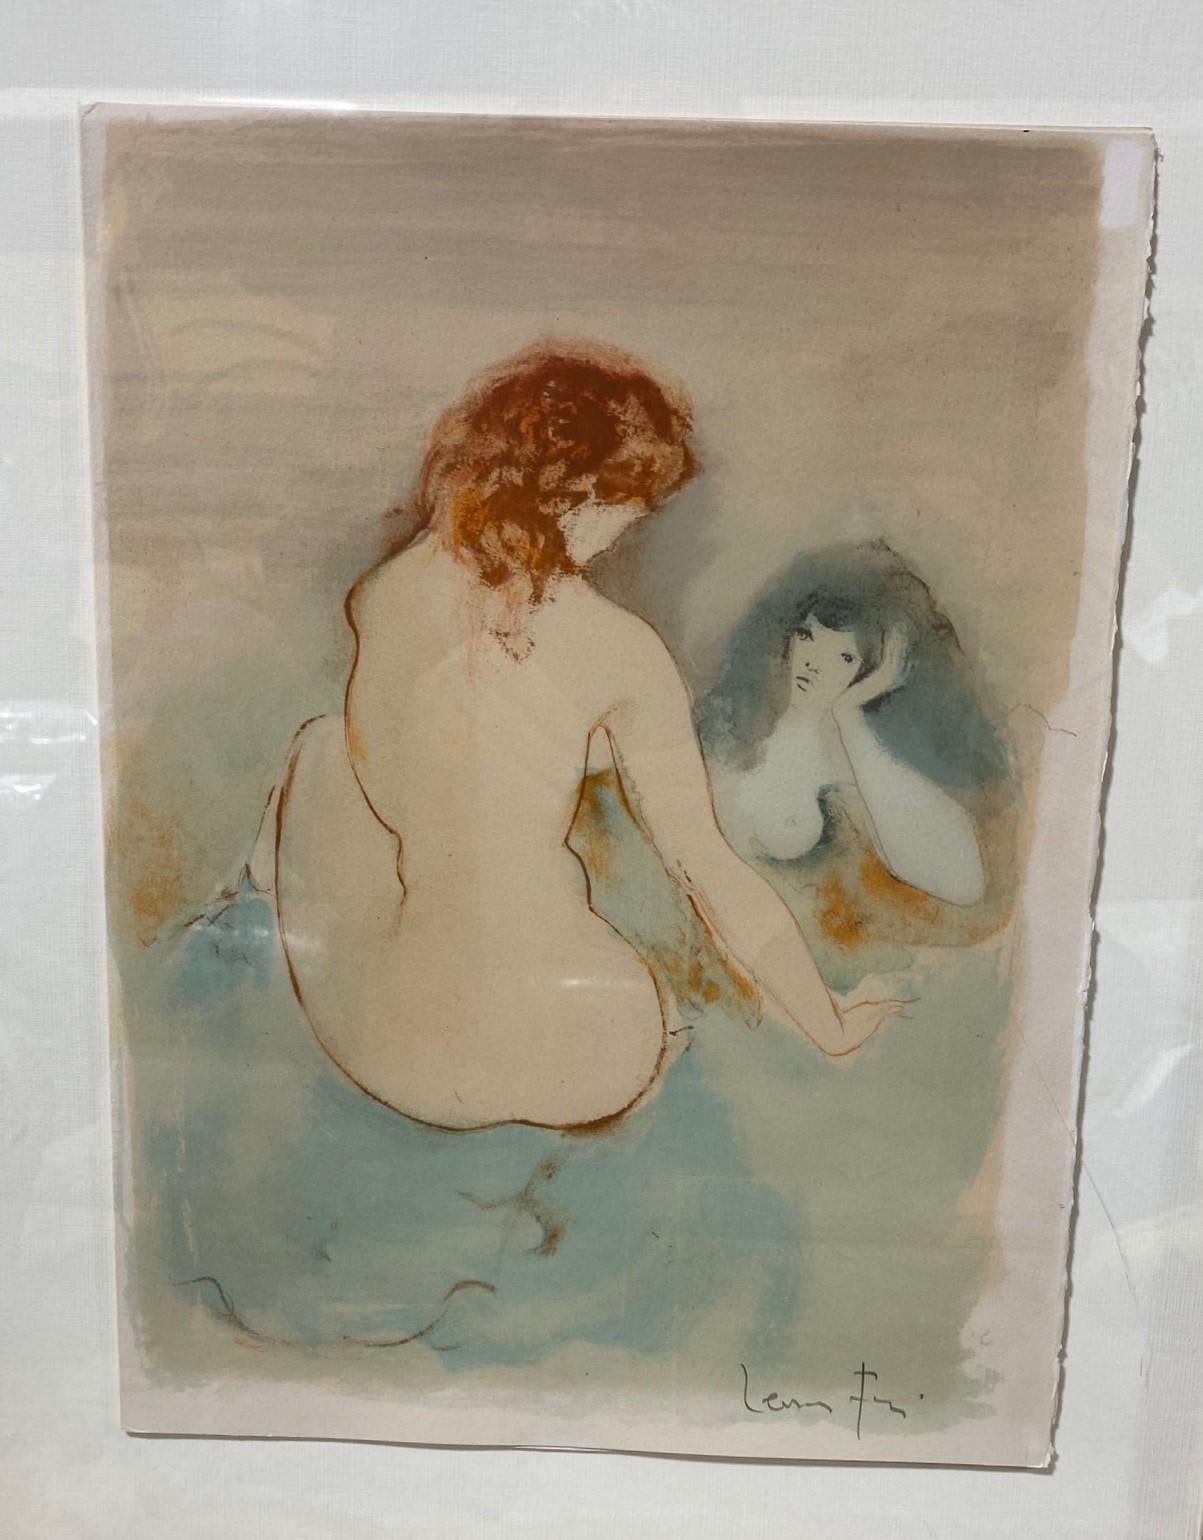 Mid-Century Modern Leonor Fini Signed Framed Beautiful Lithograph Print Deux Femmes, circa 1970s For Sale